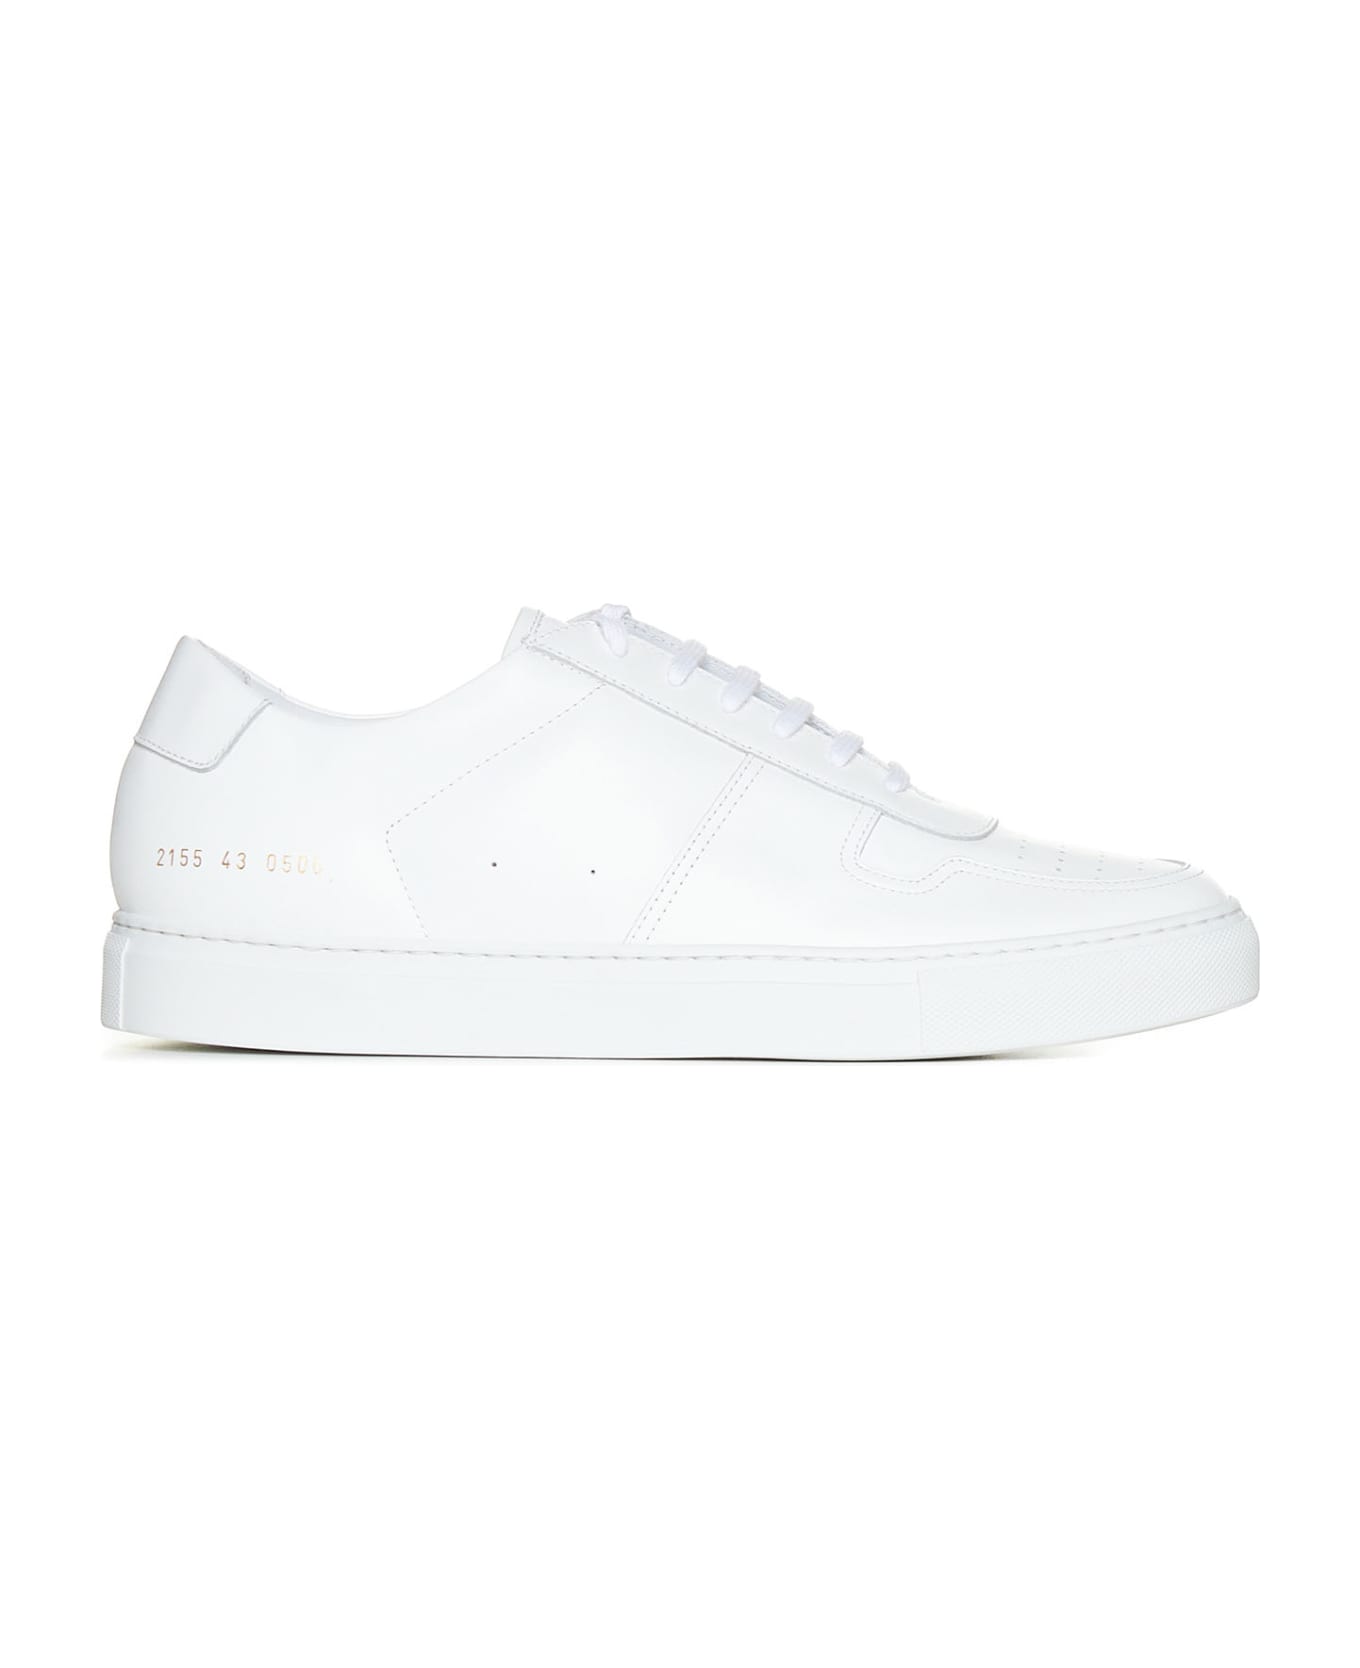 Common Projects Bball Low Sneakers - White スニーカー